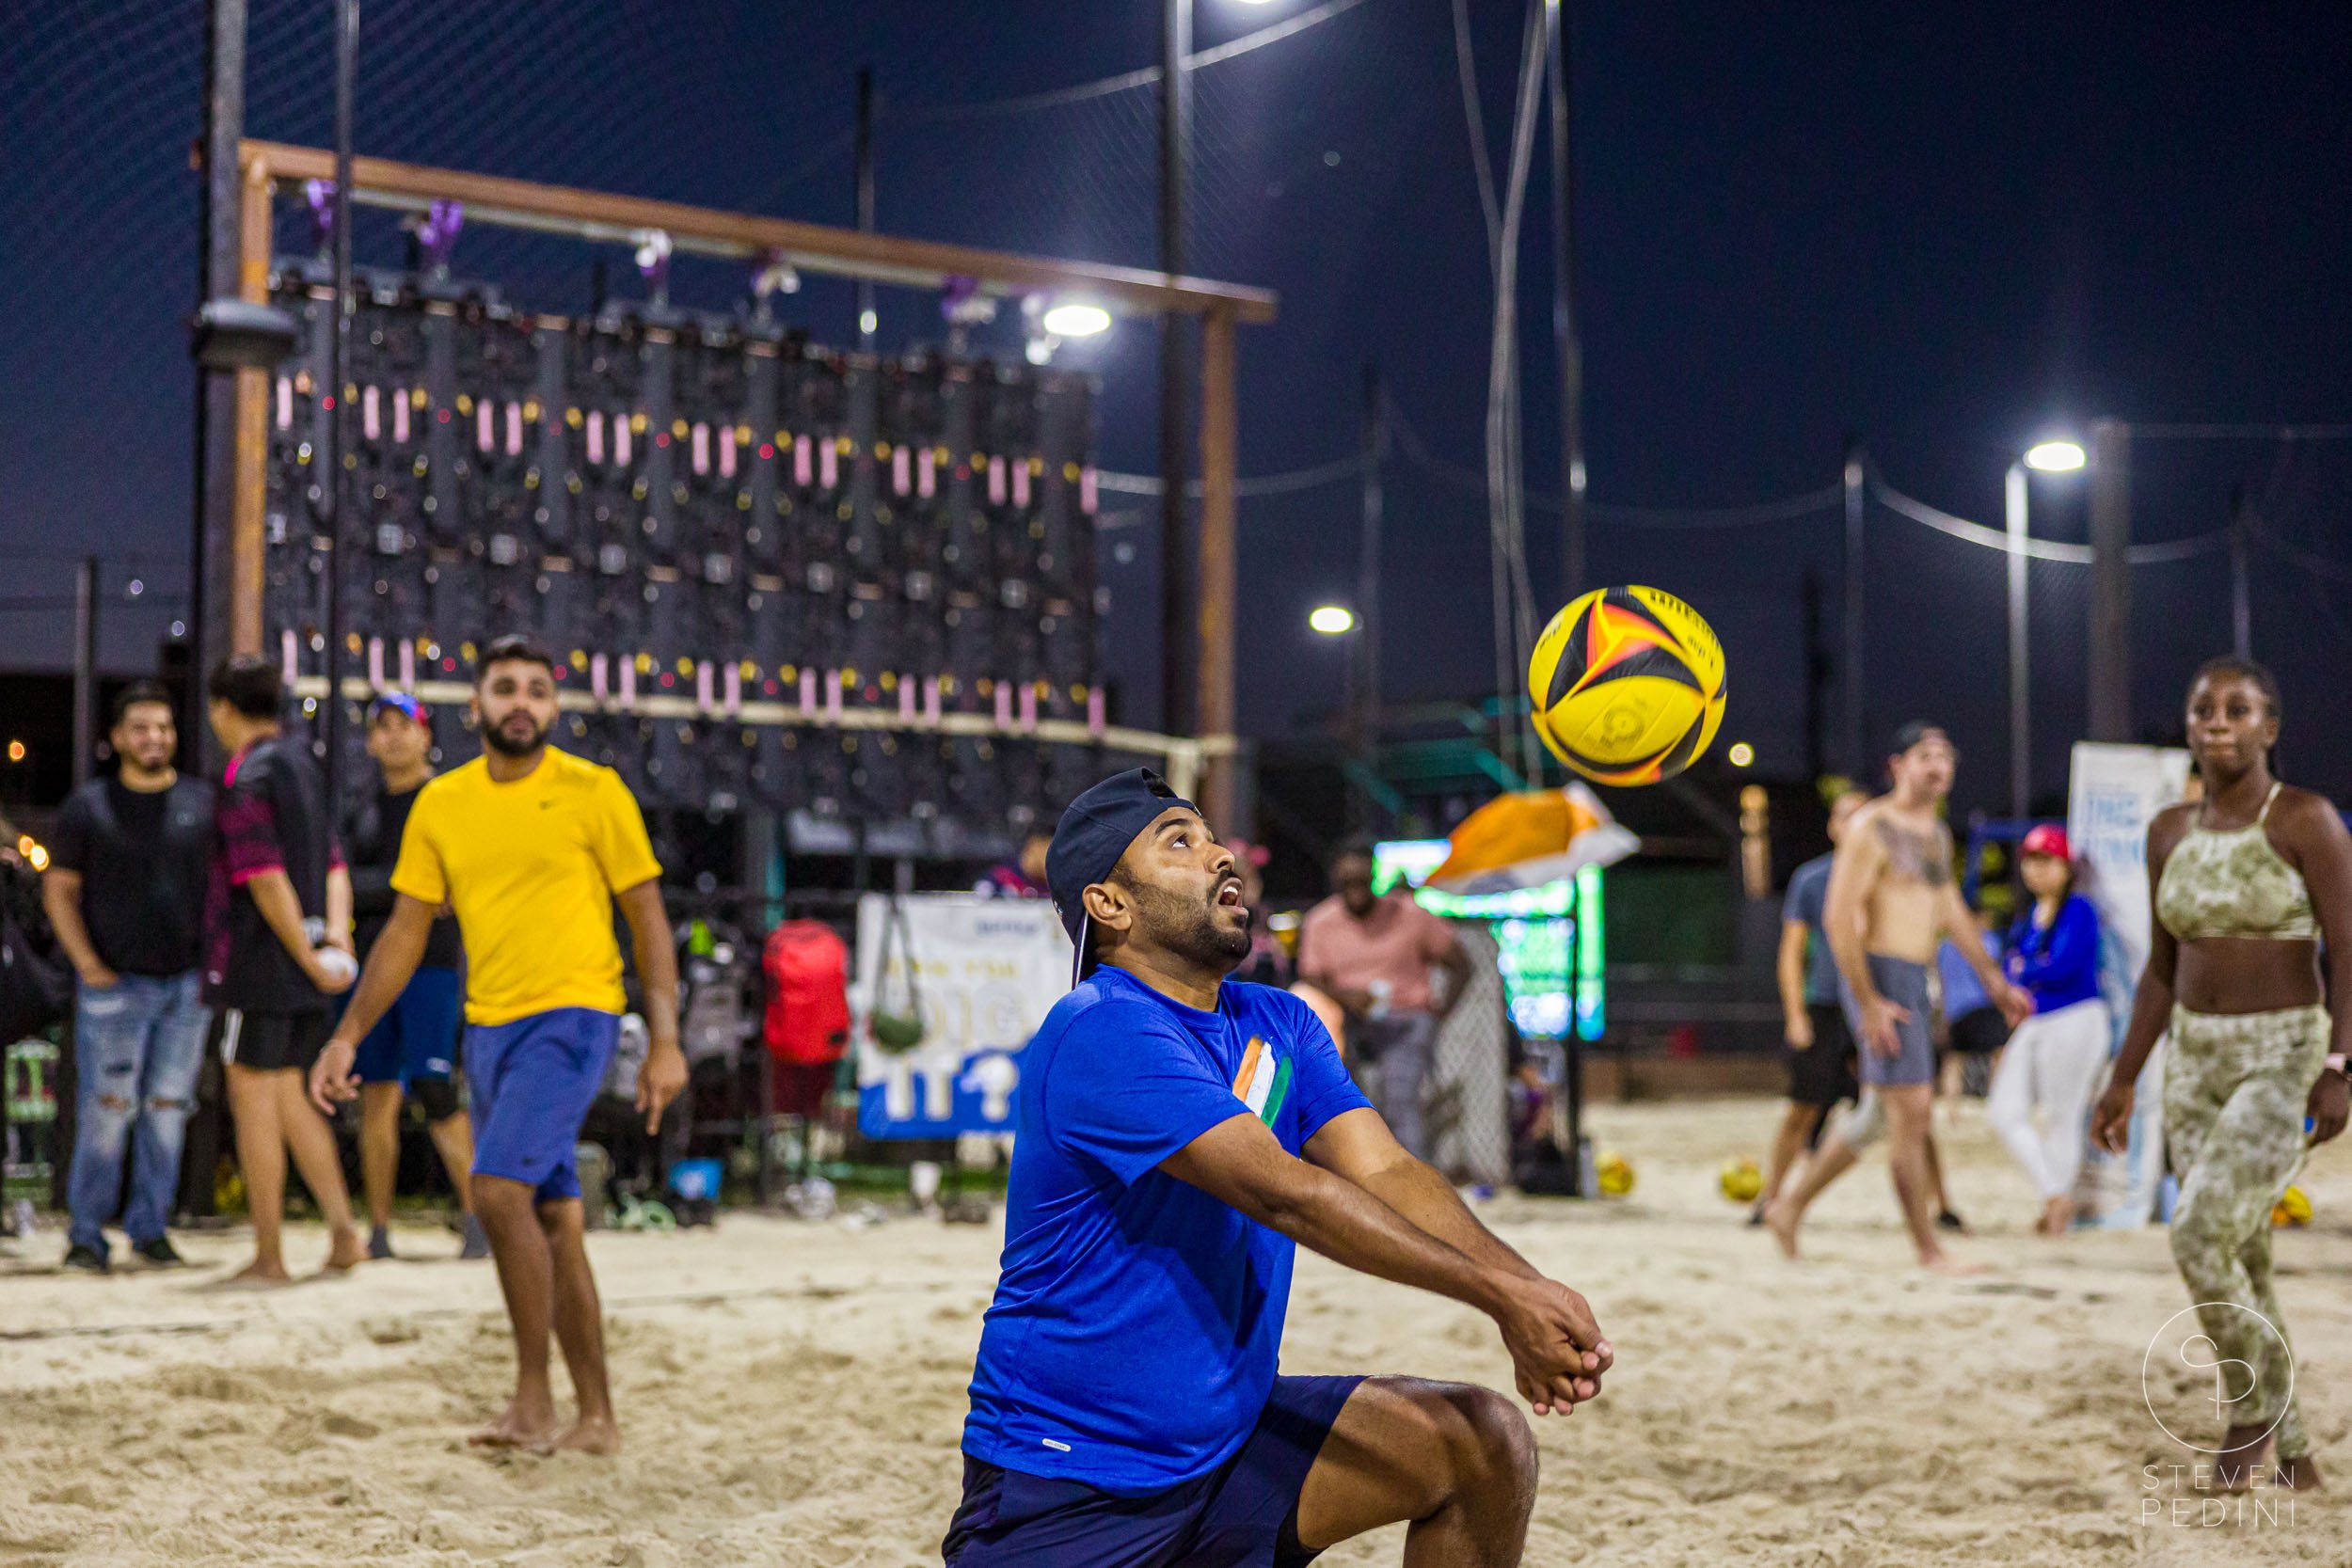 Steven Pedini Photography - Bumpy Pickle - Sand Volleyball - Houston TX - World Cup of Volleyball - 00345.jpg